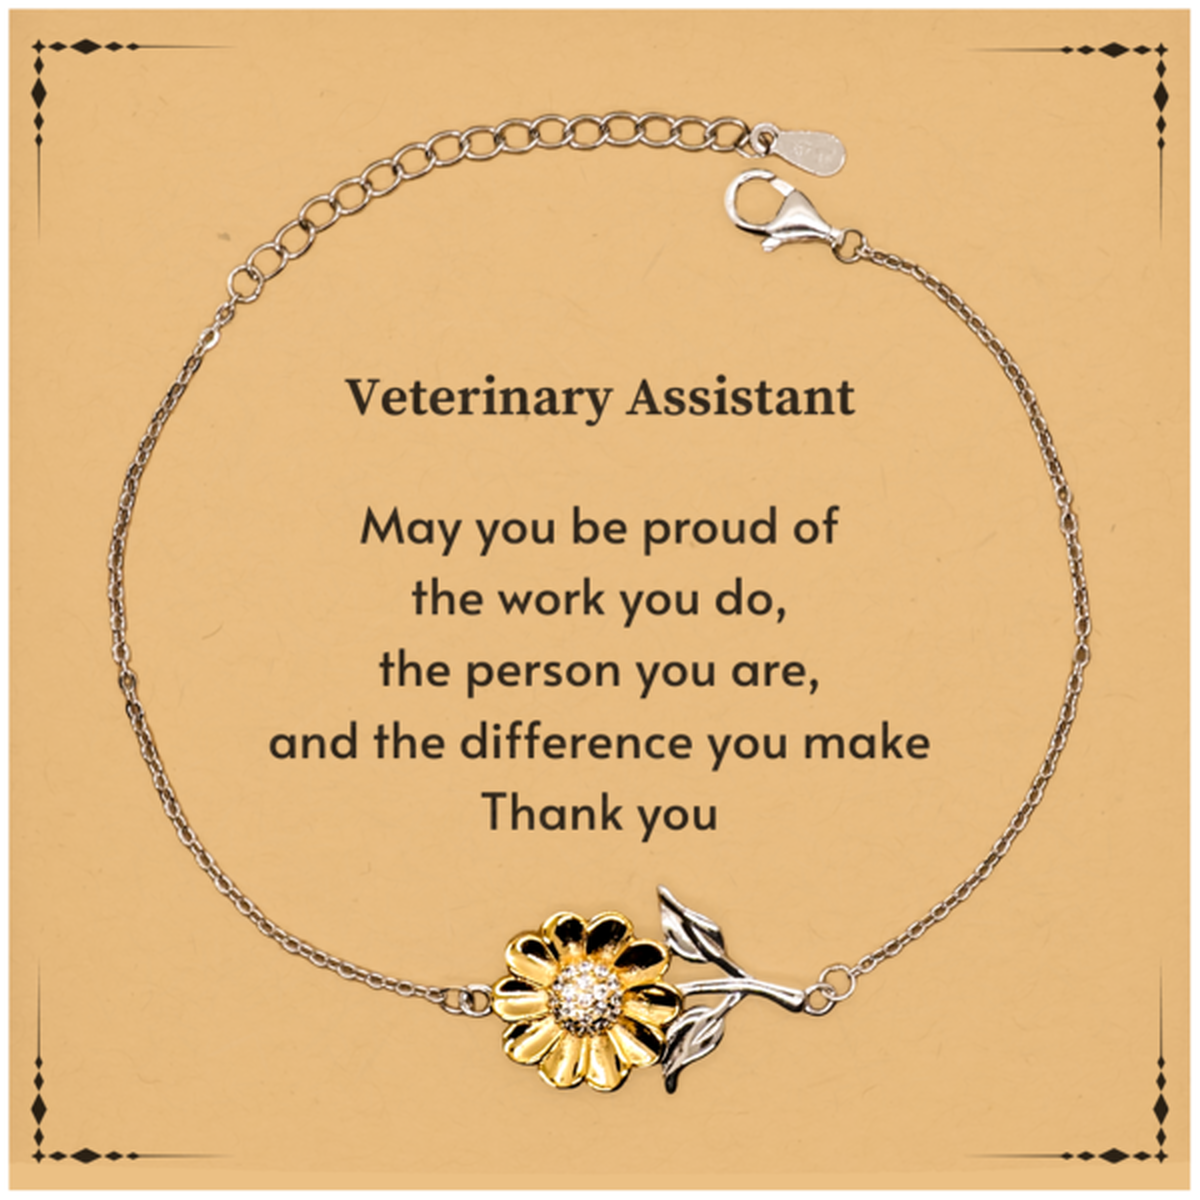 Heartwarming Sunflower Bracelet Retirement Coworkers Gifts for Veterinary Assistant, Veterinary Assistant May You be proud of the work you do, the person you are Gifts for Boss Men Women Friends